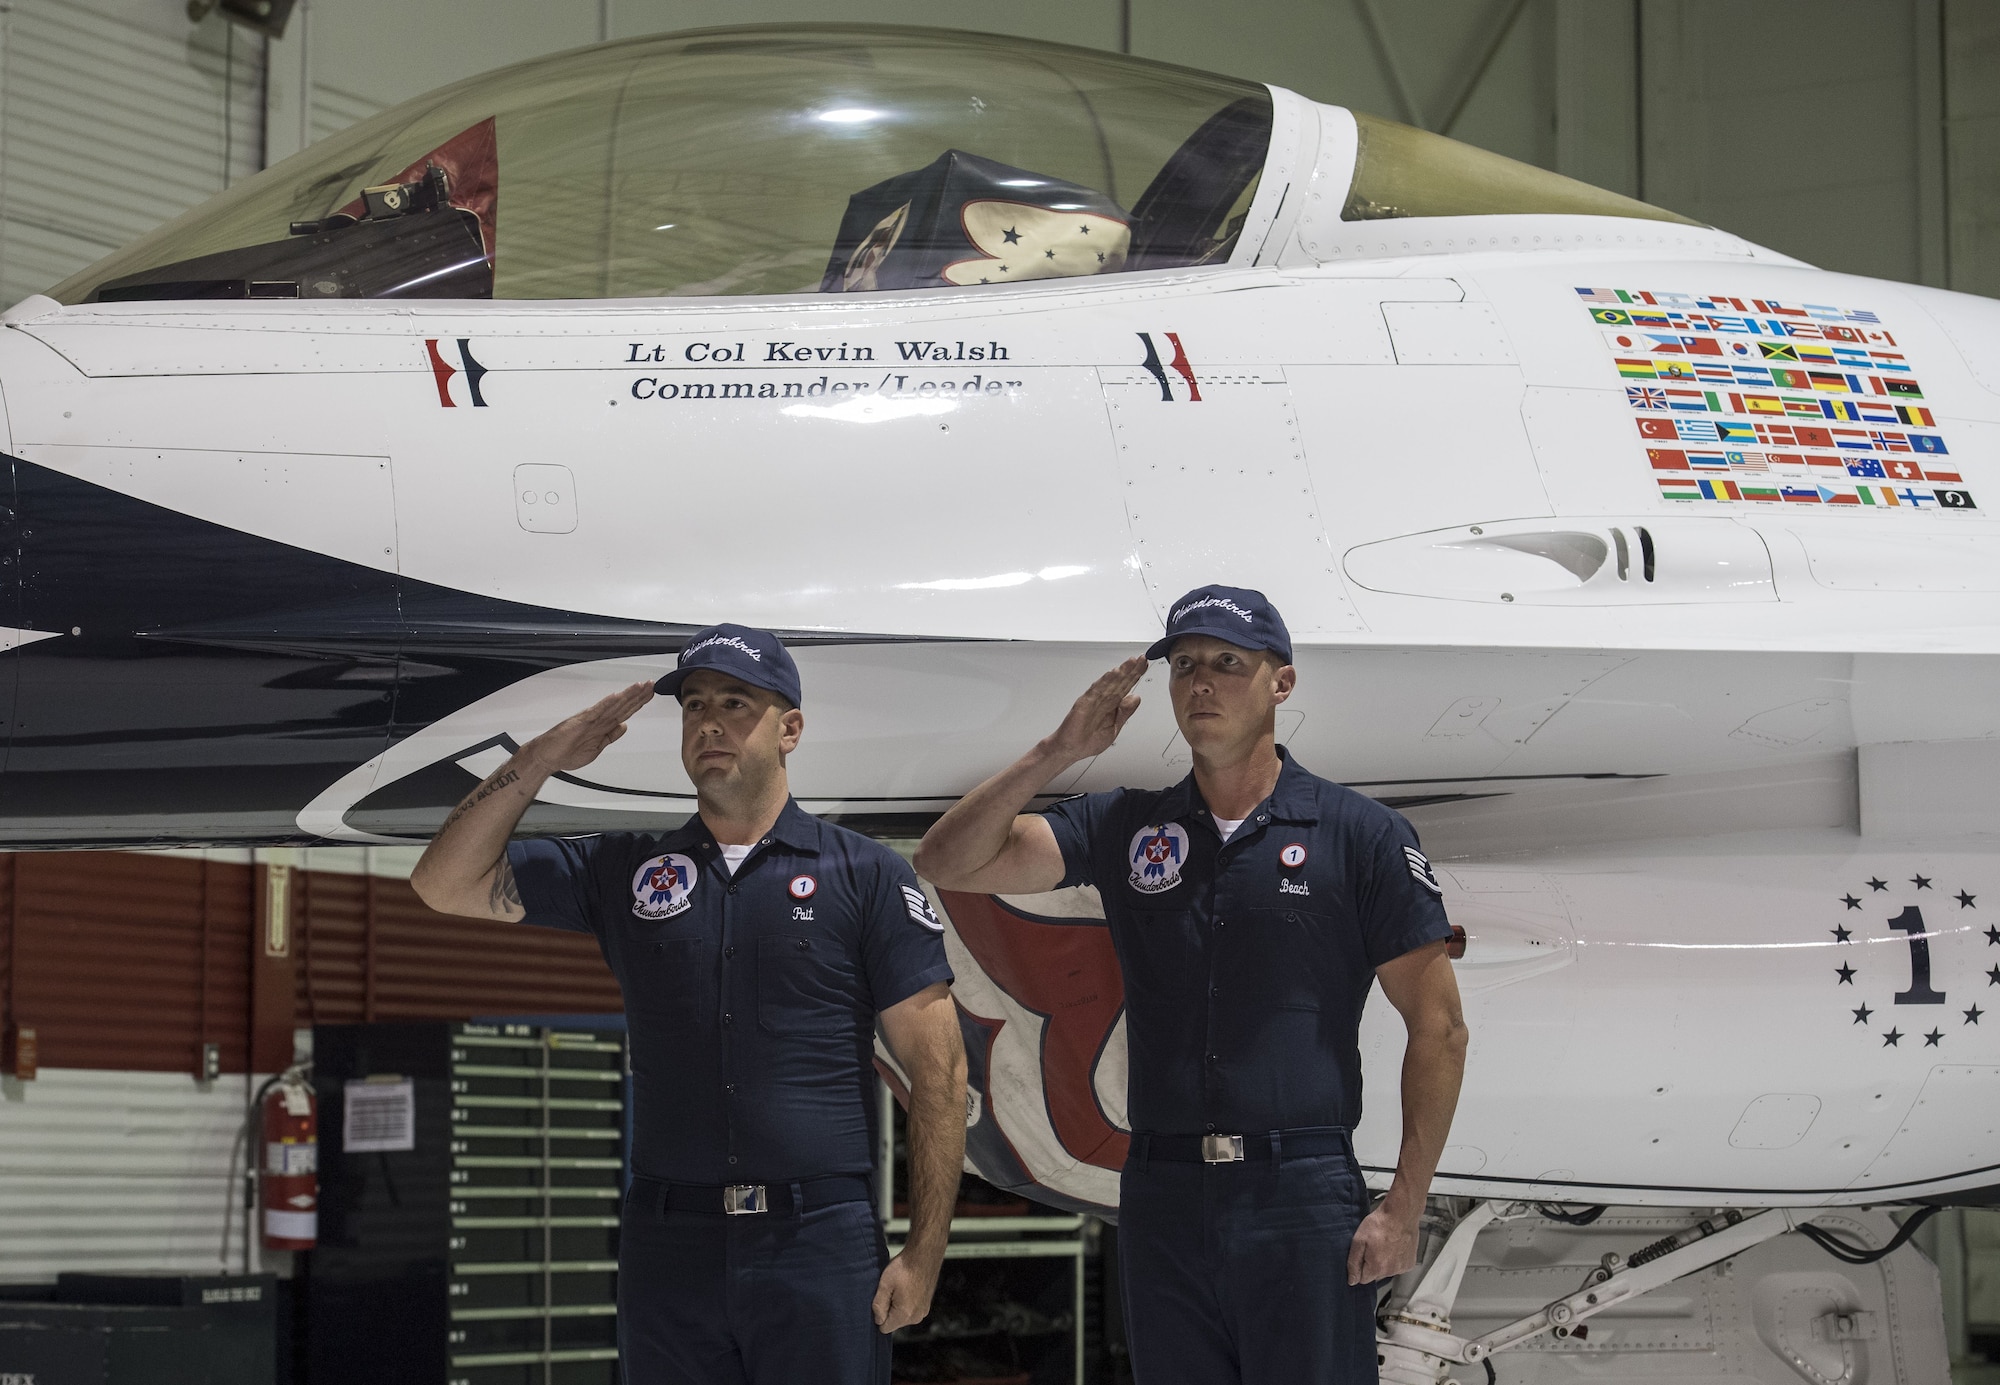 Walsh assumes command of Thunderbirds squadron